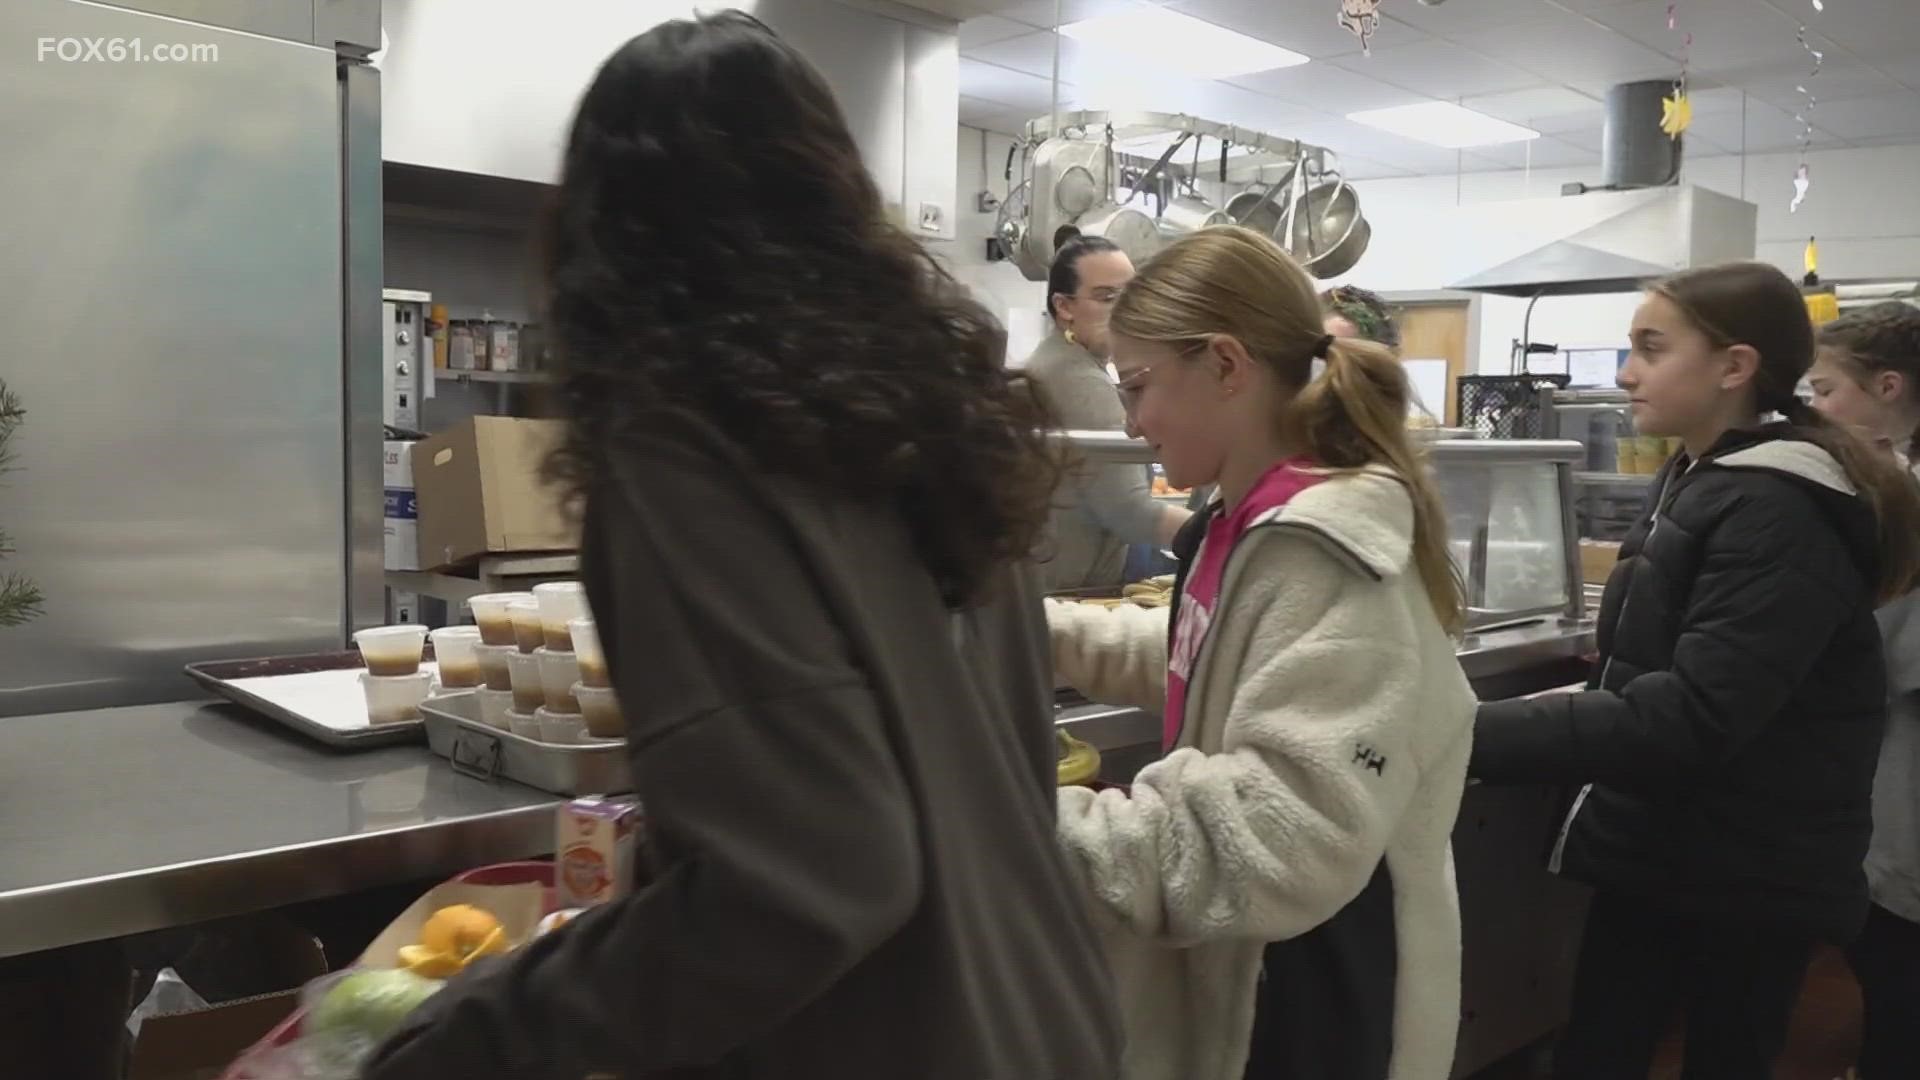 The free meals started with the onset of COVID-19 with federal pandemic-era funding, but in February the Connecticut legislature passed a bill to extend it.